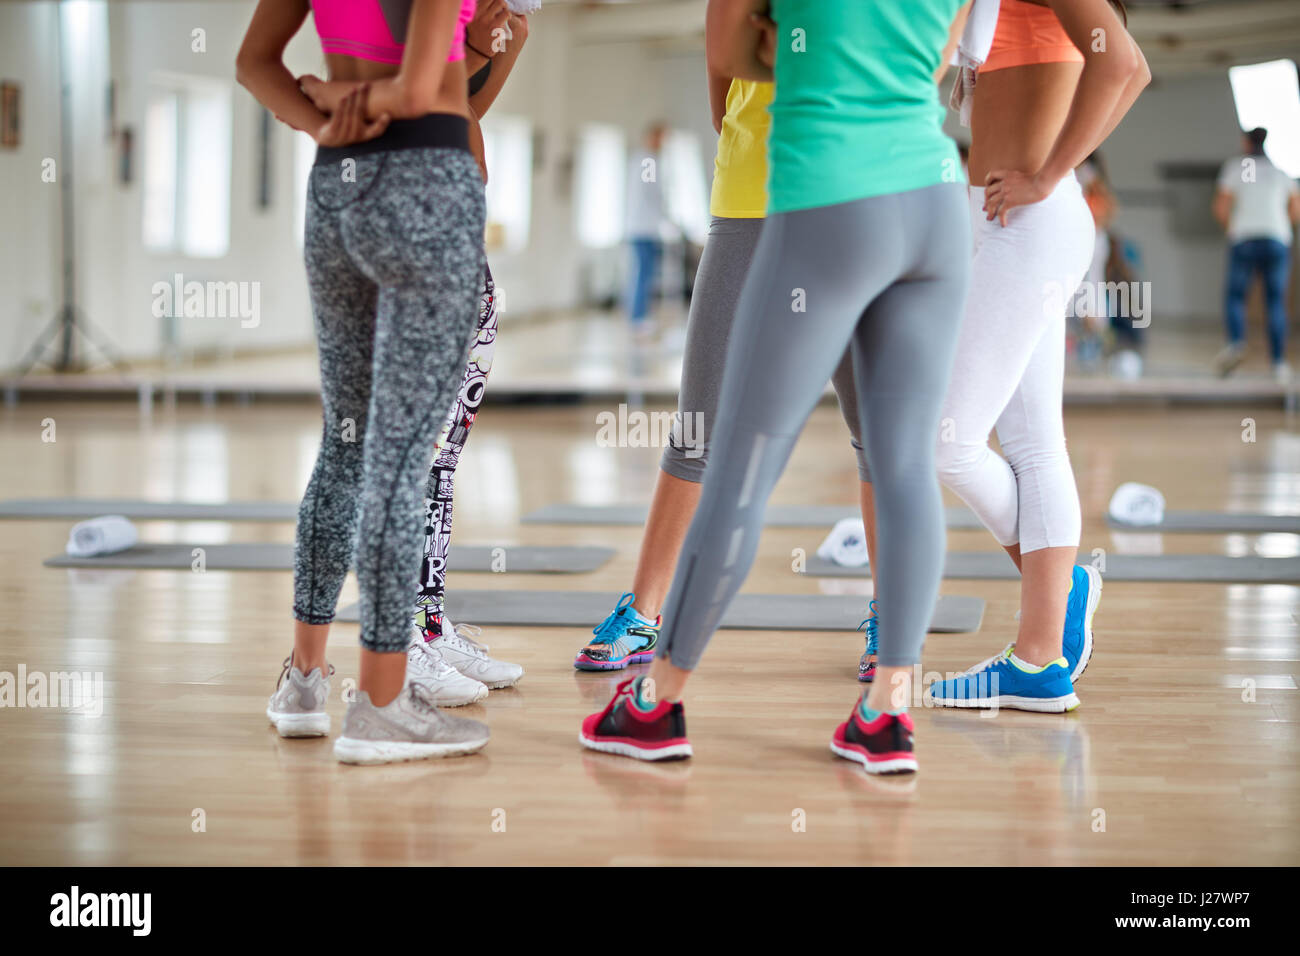 Fitness group-legs concept Stock Photo